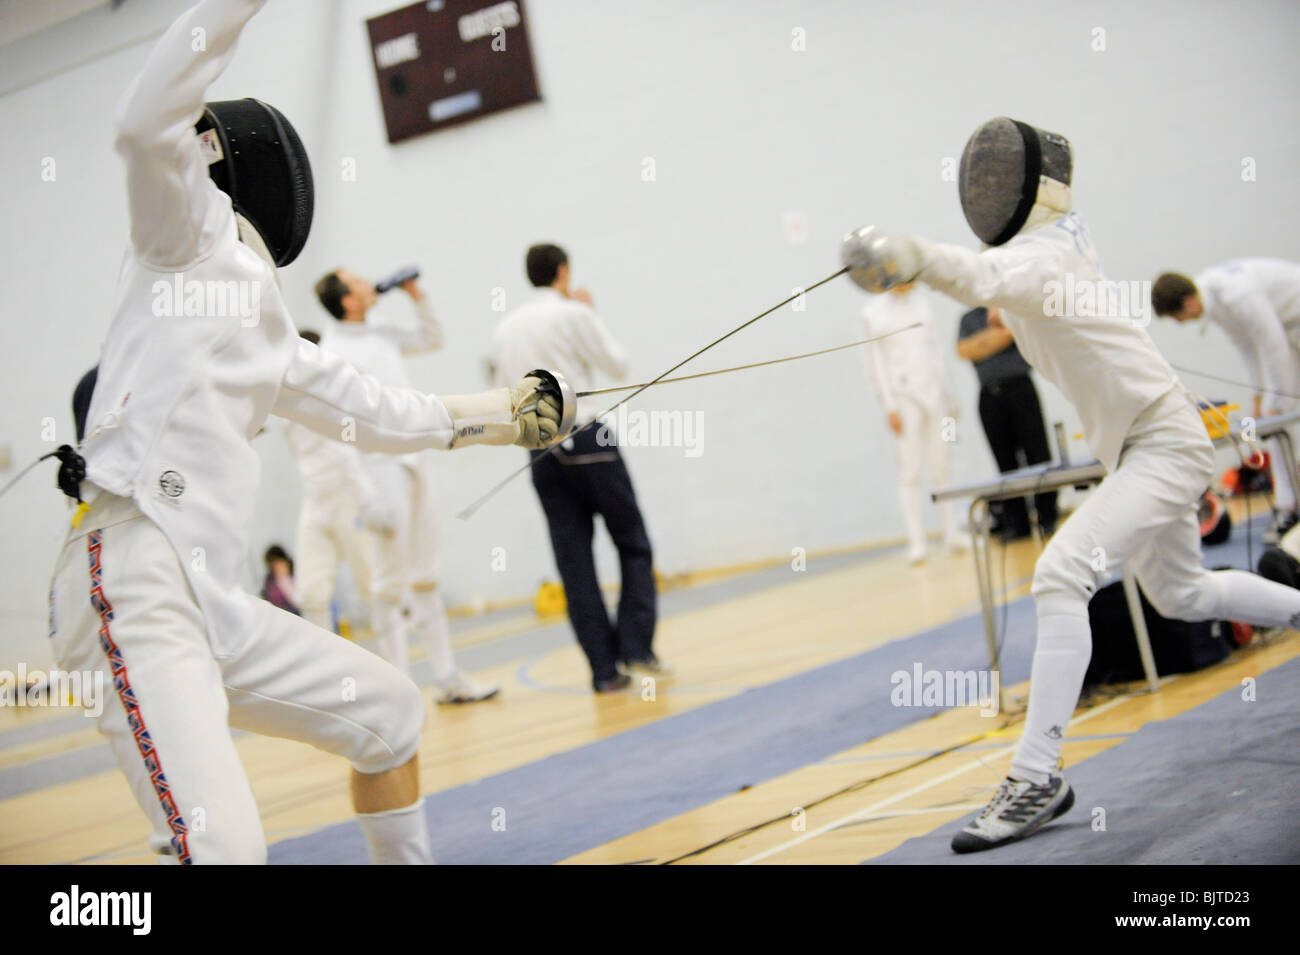 Aspiring members of the UK fencing team take part in a fencing competition, Morden, 28 November 2009. Stock Photo